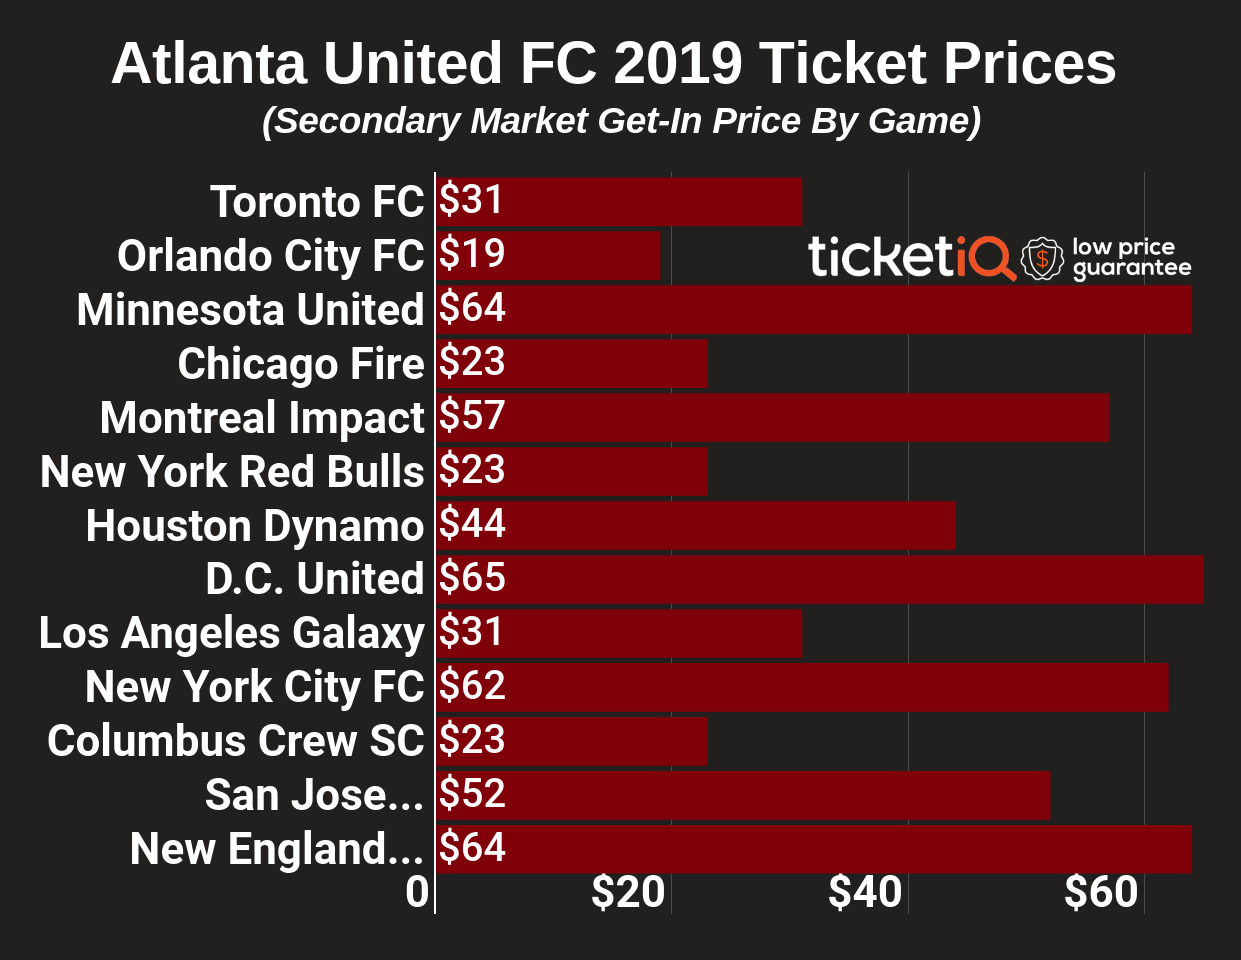 where-to-find-cheapest-atlanta-united-fc-ticket-prices-for-2019-schedule